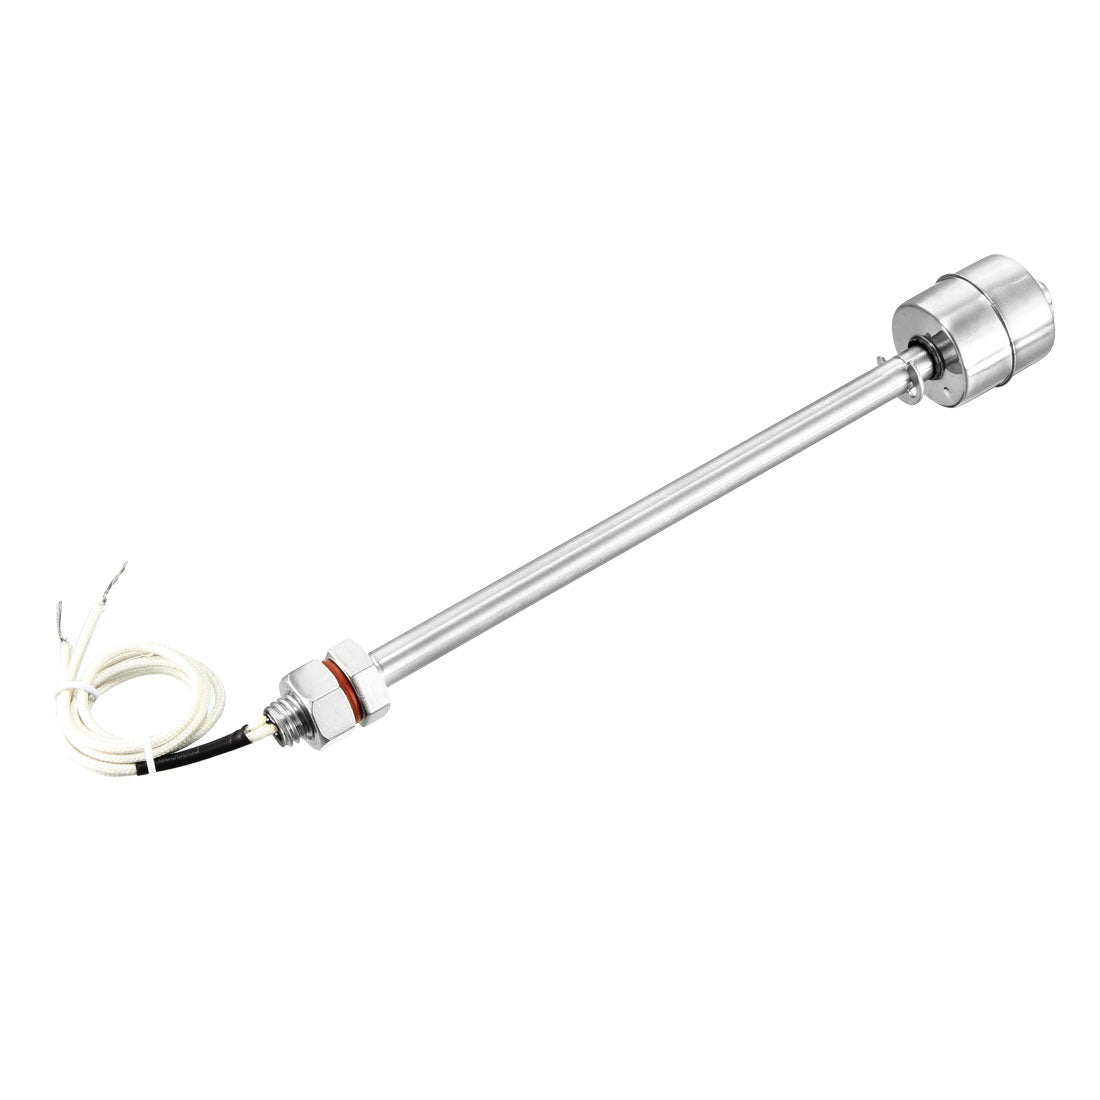 uxcell Uxcell 200mm Stainless Steel Water Level Sensor Liquid Vertical Float Switch